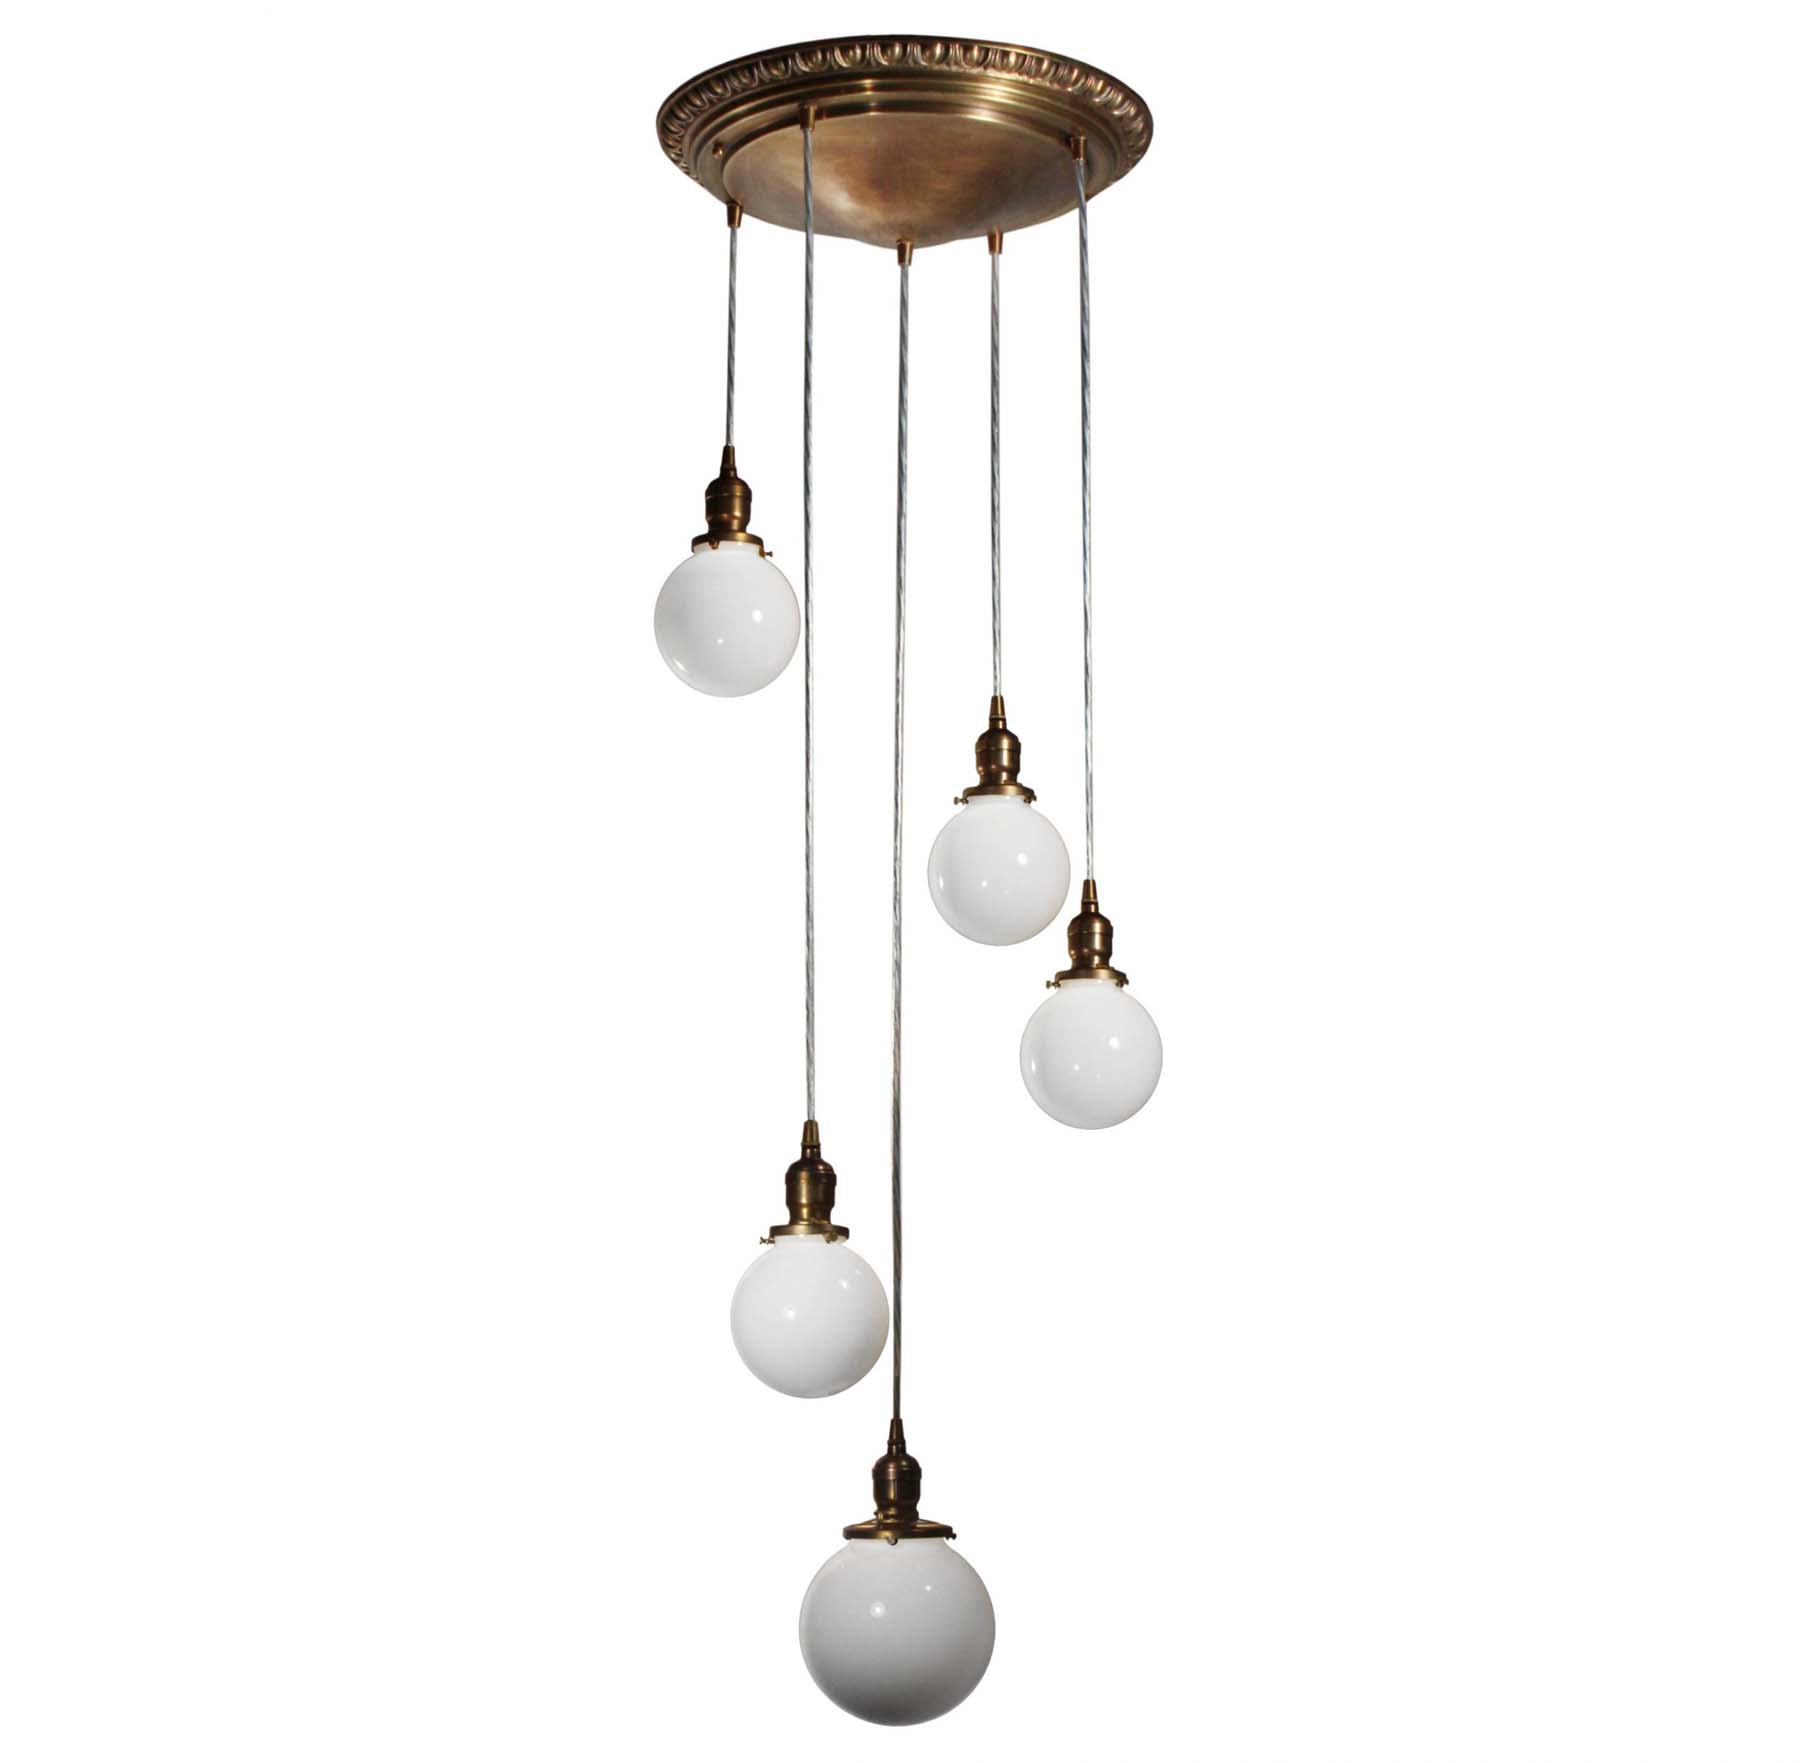 SOLD Antique Semi Flush-Mount Chandelier with Ball Shades-68313